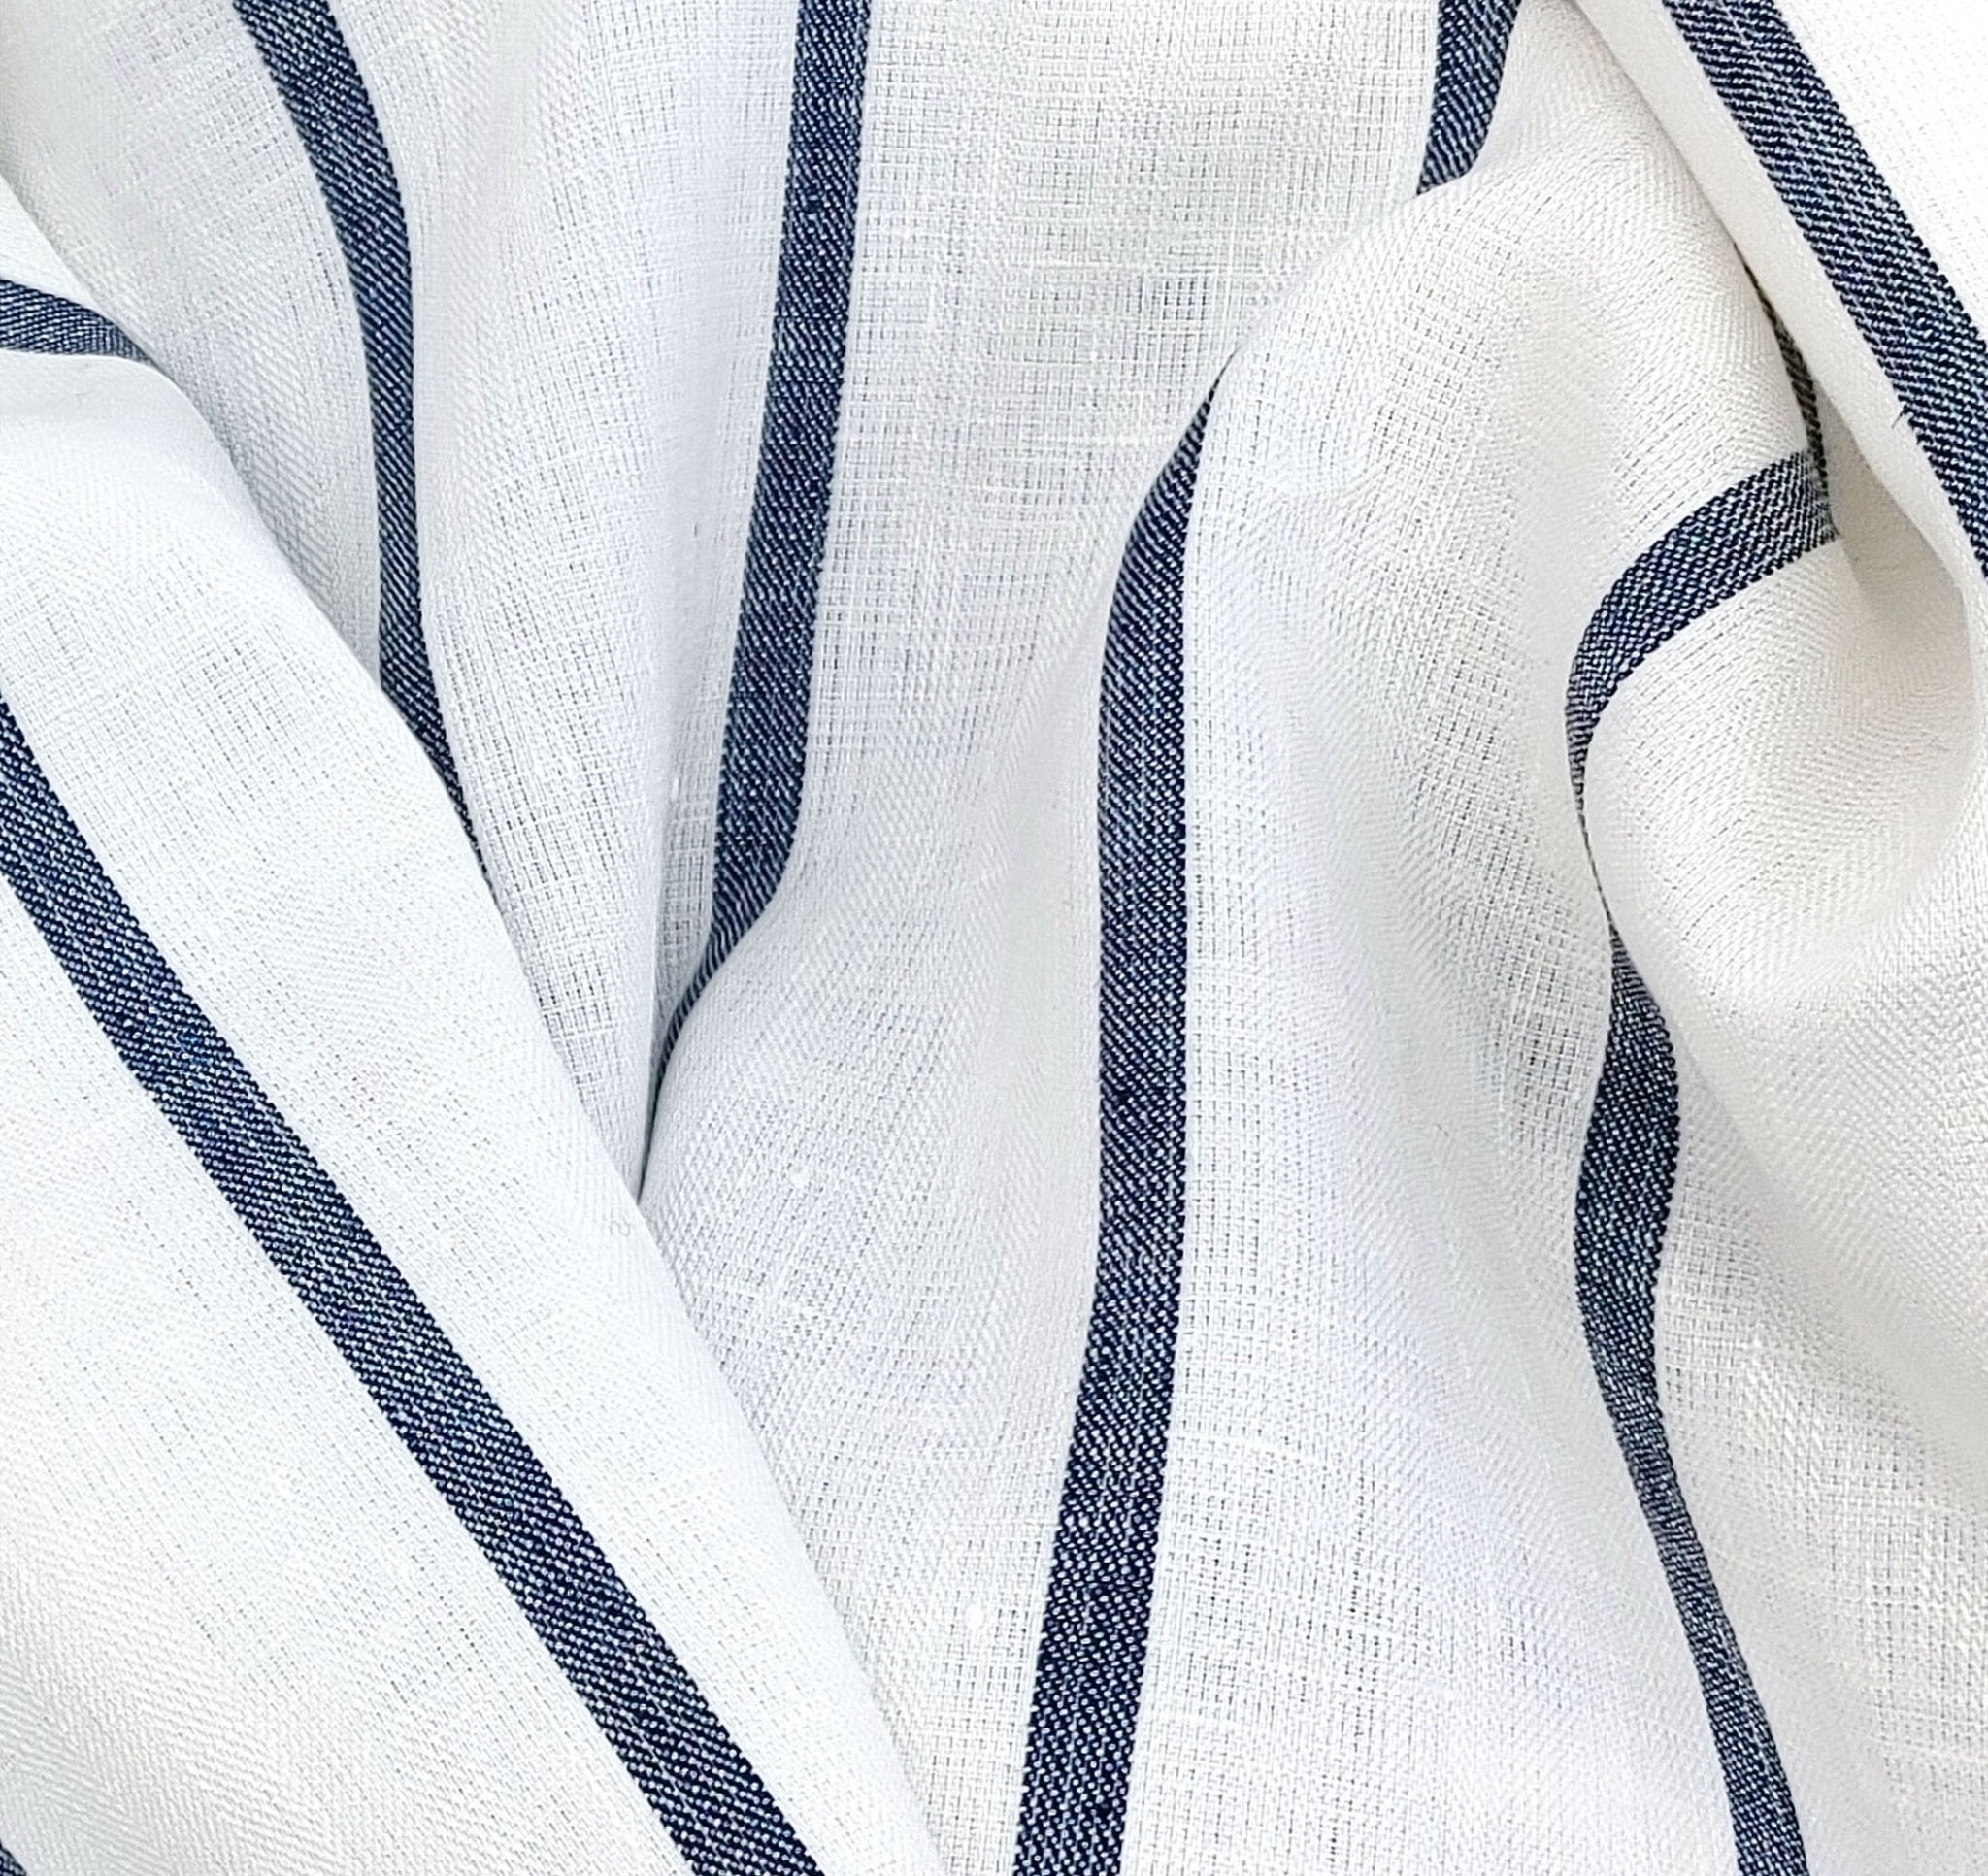 100% Linen HBT Fabric with White Base and Navy Stripe Pattern 4860 - The Linen Lab - Navy